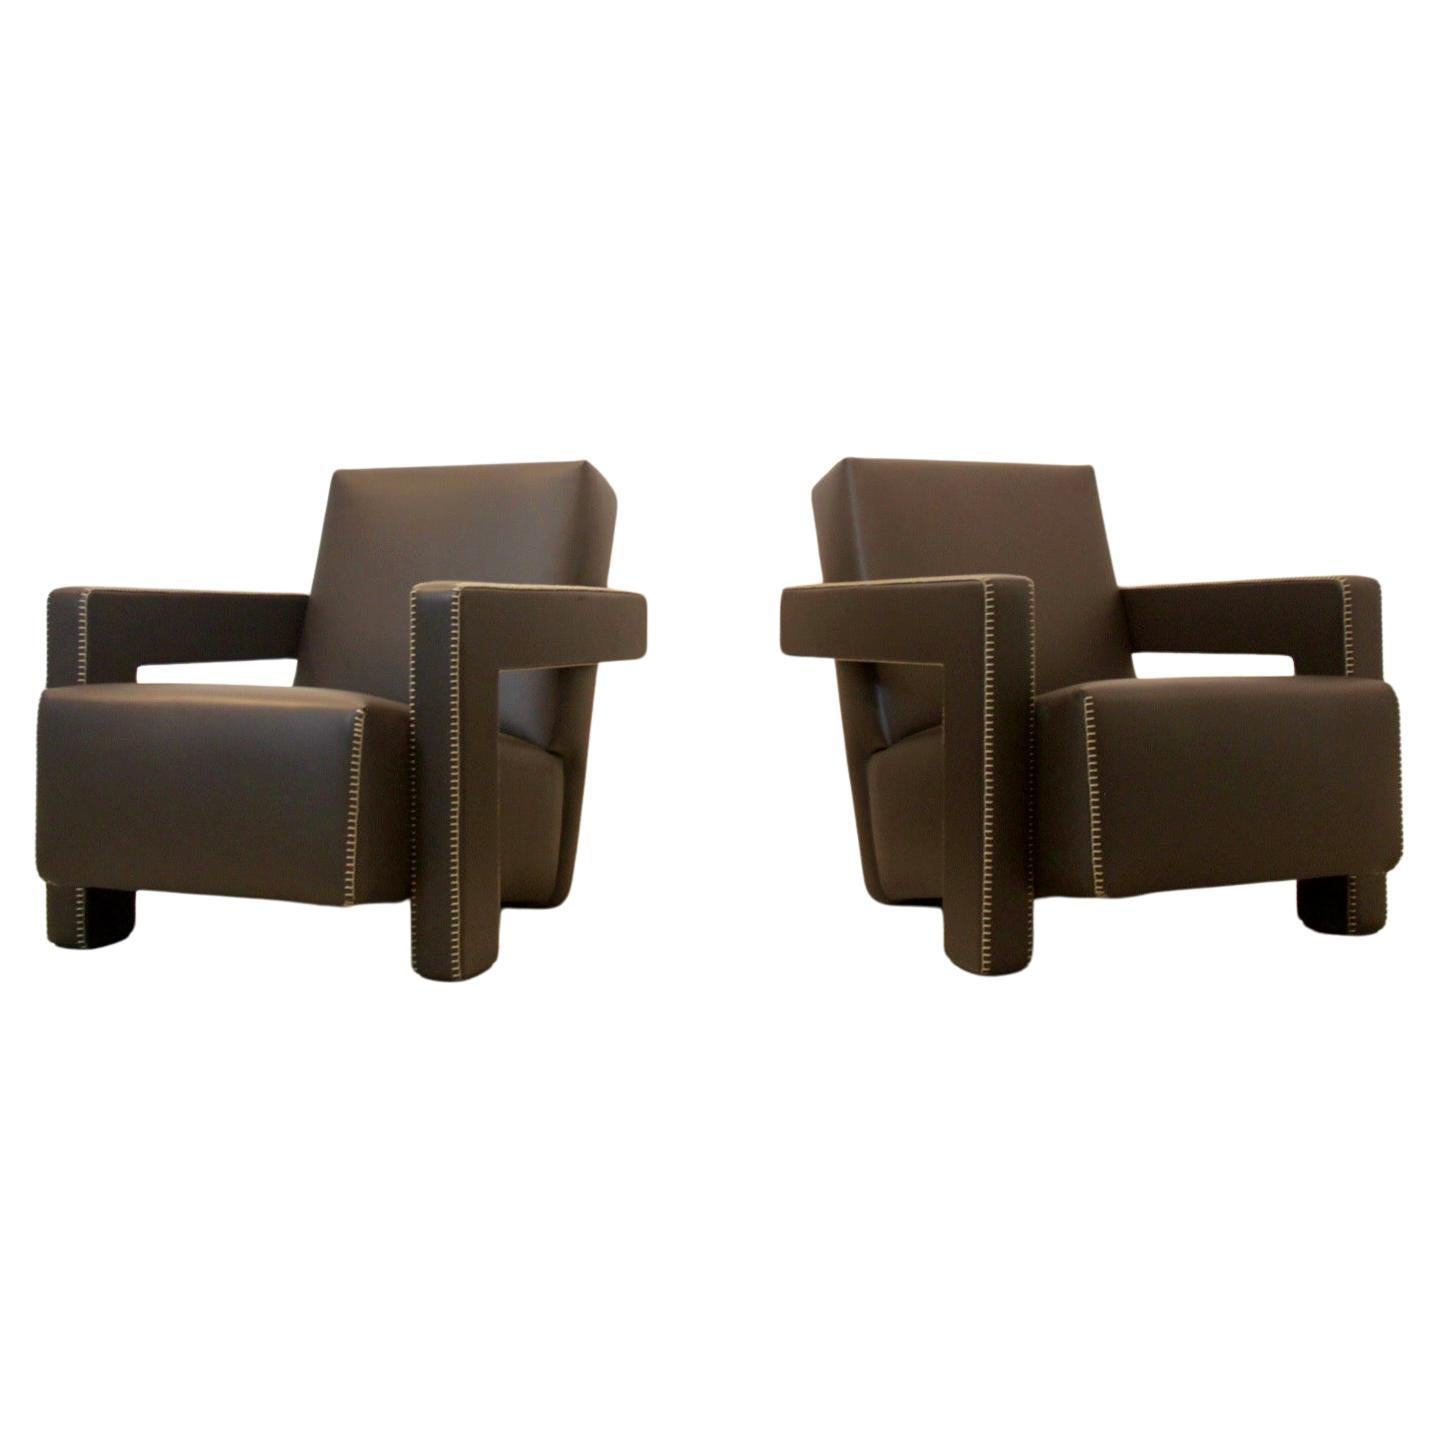 Chocolate Brown Leather ‘Utrecht’ Lounge Chairs by Gerrit Rietveld for Cassina For Sale